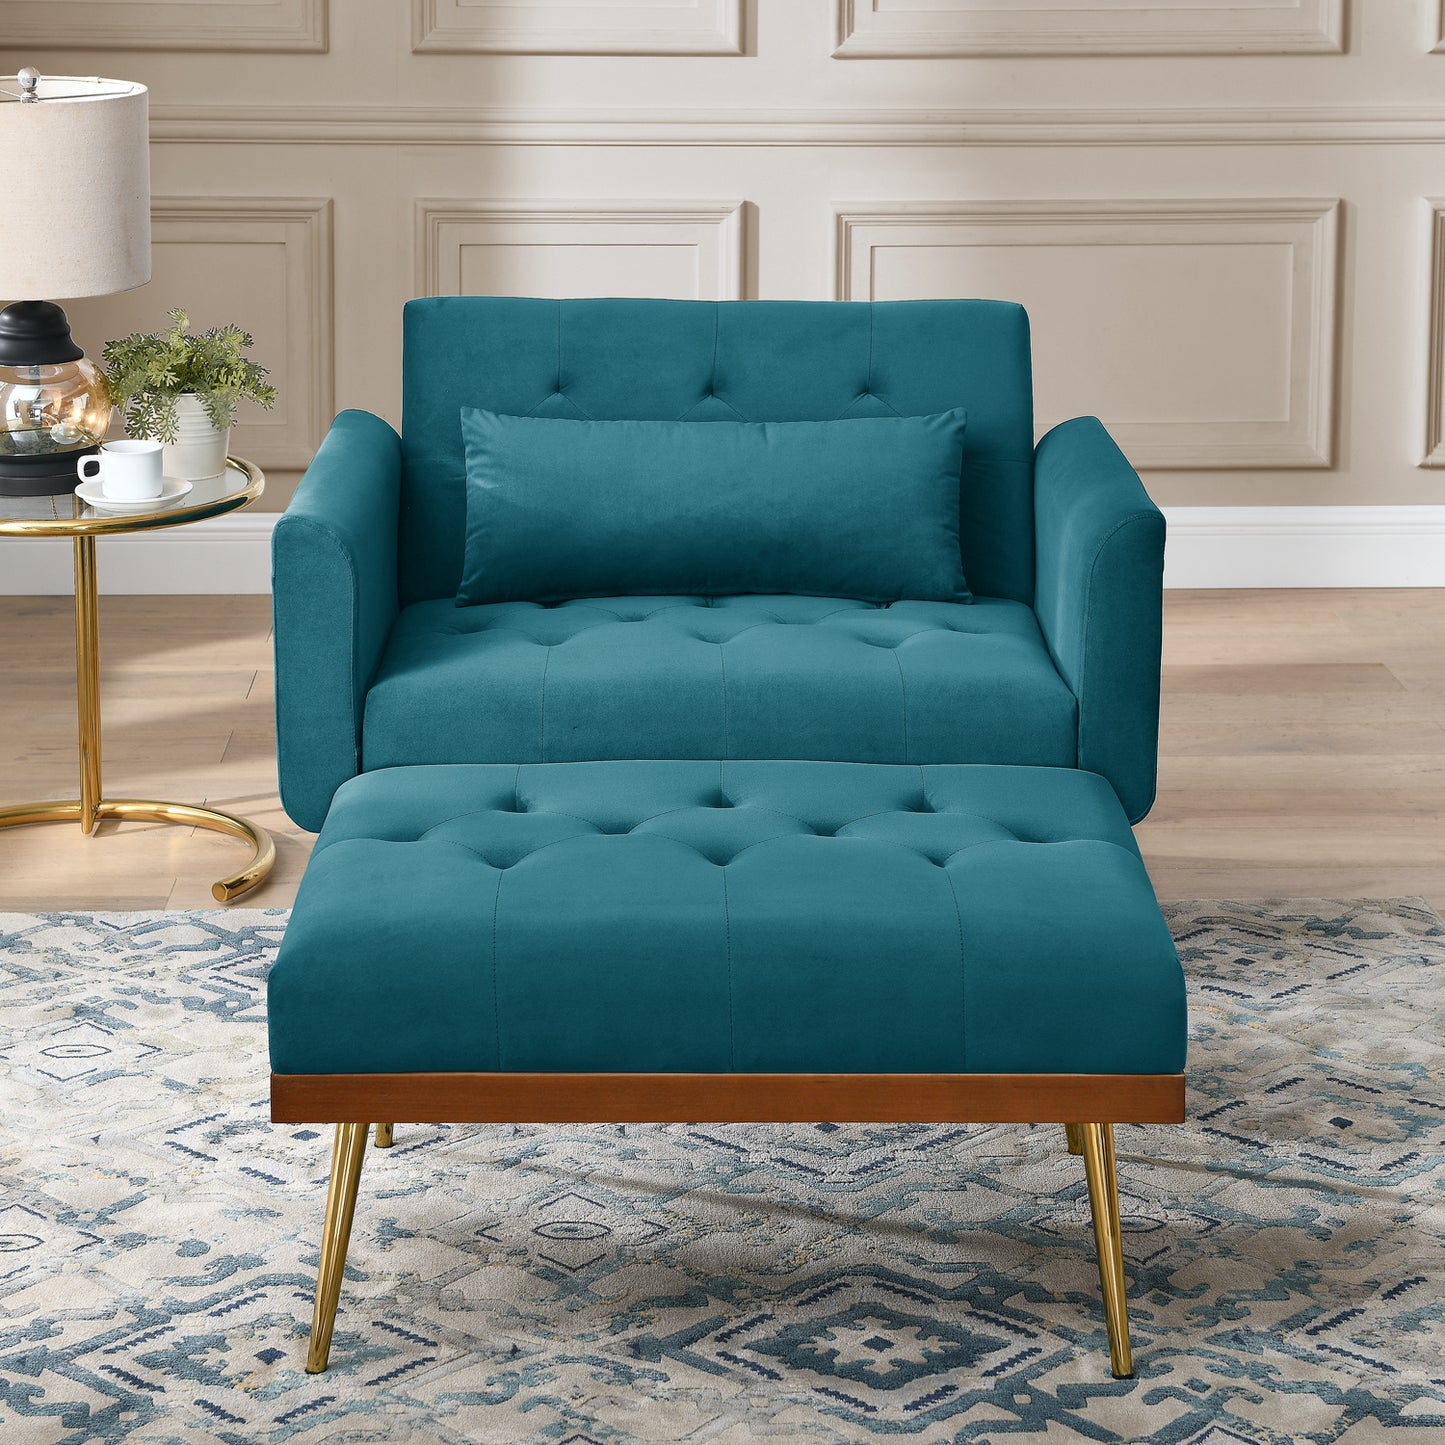 Recline Sofa Chair with Ottoman,Two Arm Pocket and Wood Frame include 1 Pillow, Teal (40.5"x33"x32")